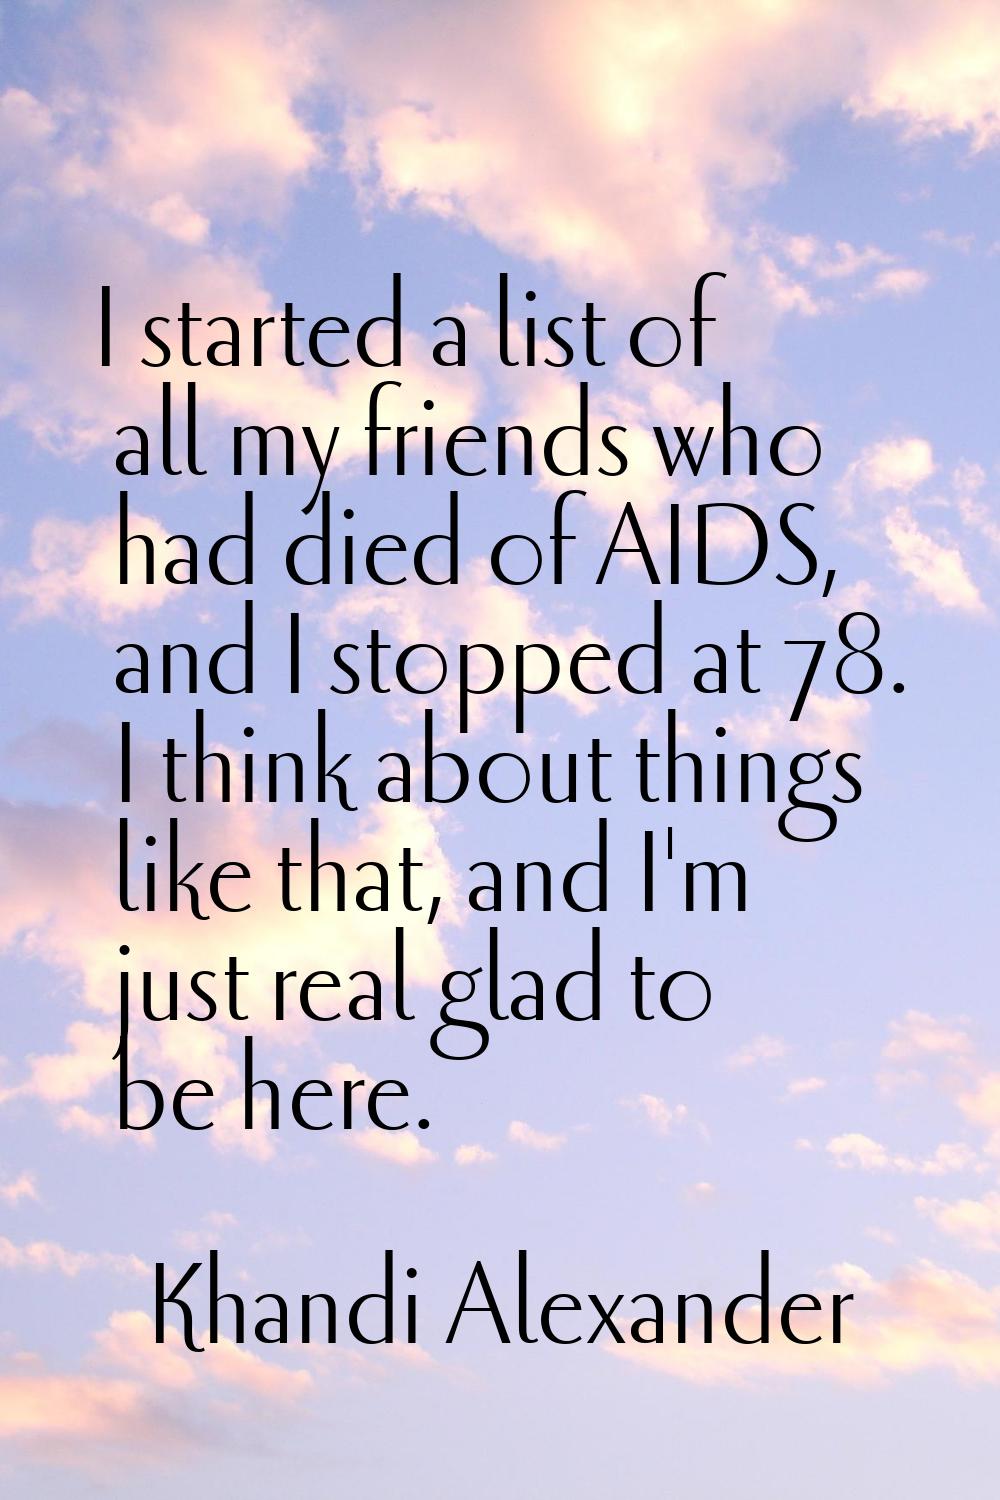 I started a list of all my friends who had died of AIDS, and I stopped at 78. I think about things 